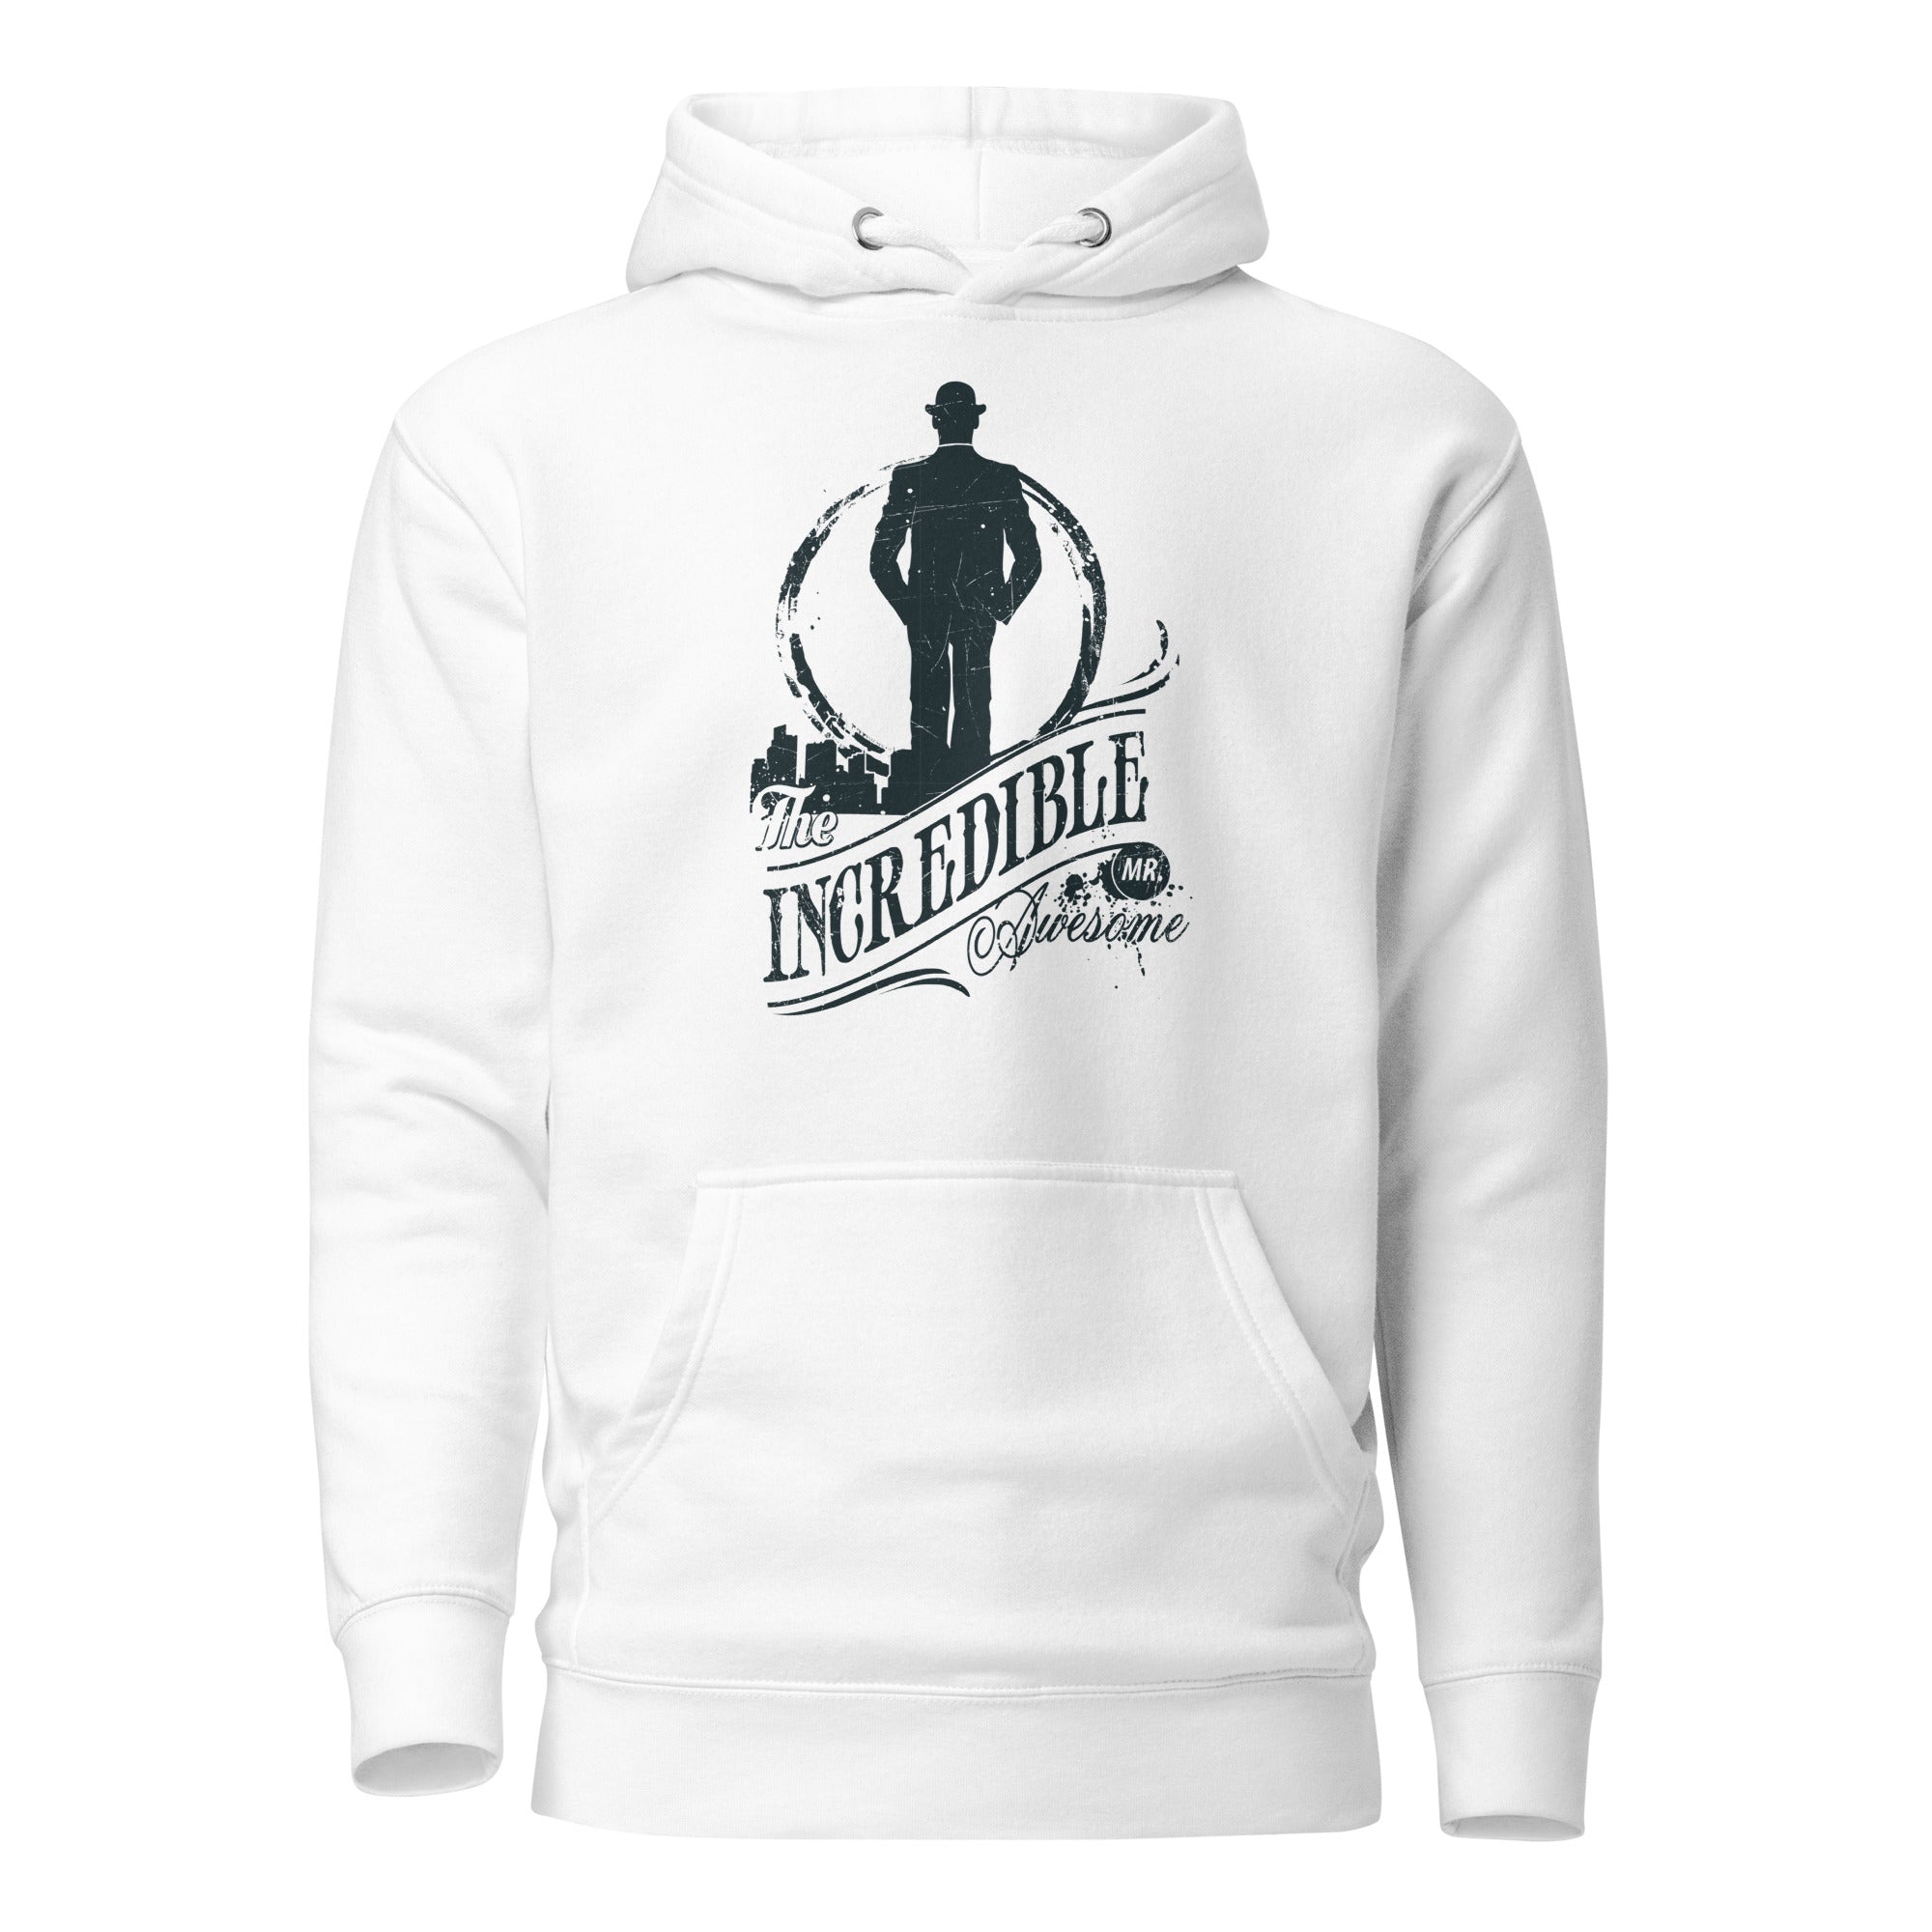 Unisex Premium Hoodie - Cotton Heritage - The Incredible Mr Awesome Vintage - GRAPHIC T-SHIRTS